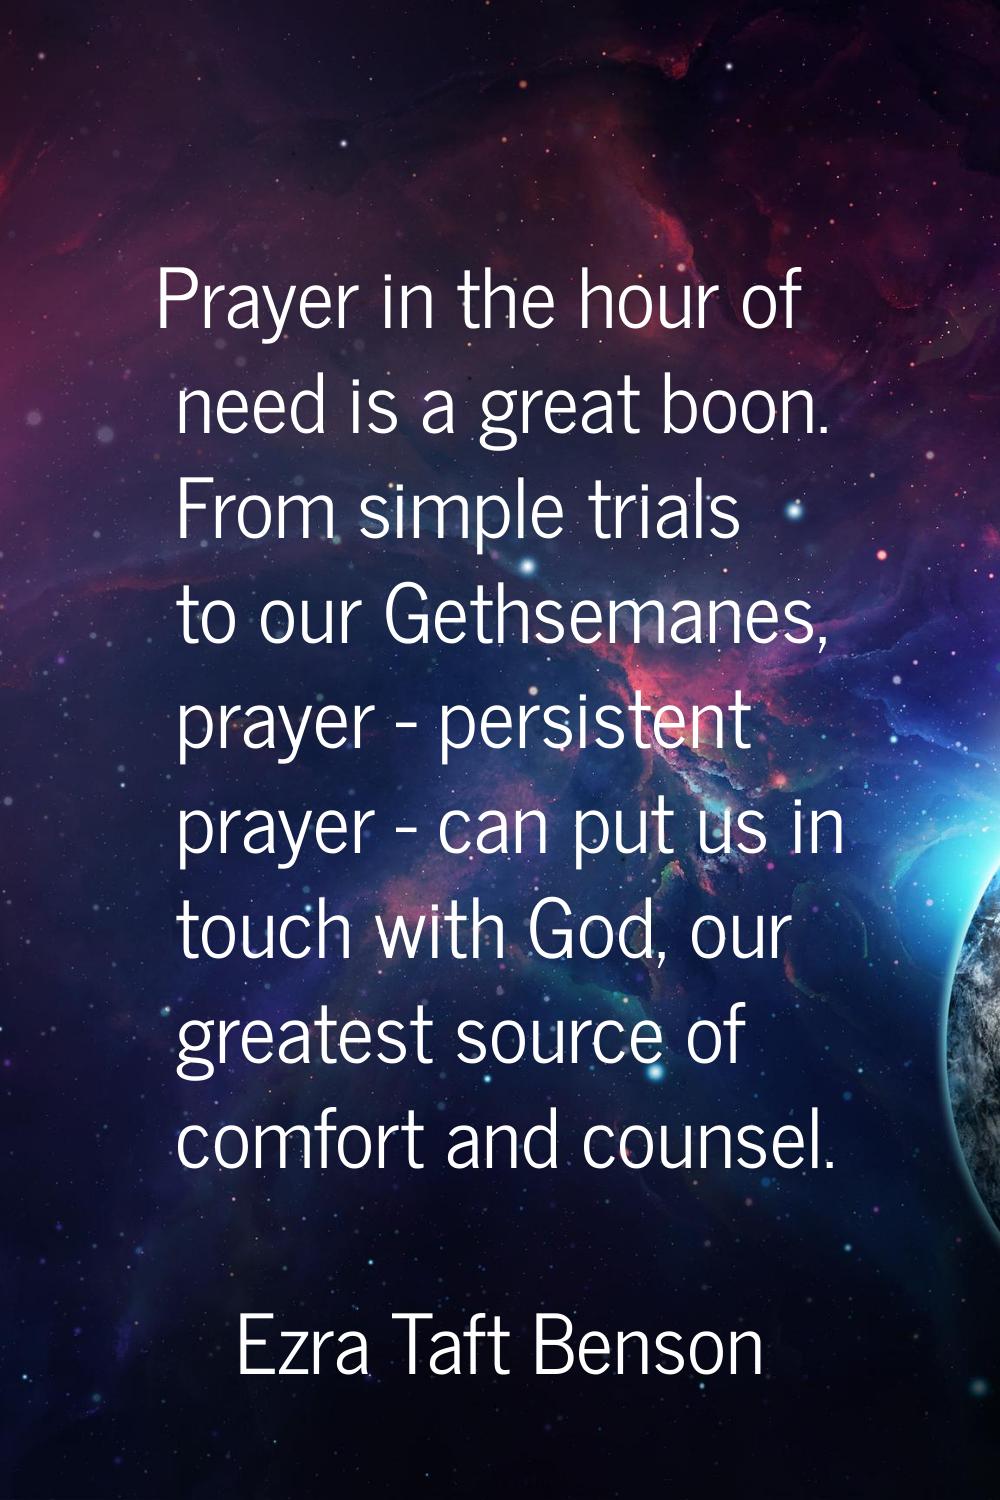 Prayer in the hour of need is a great boon. From simple trials to our Gethsemanes, prayer - persist